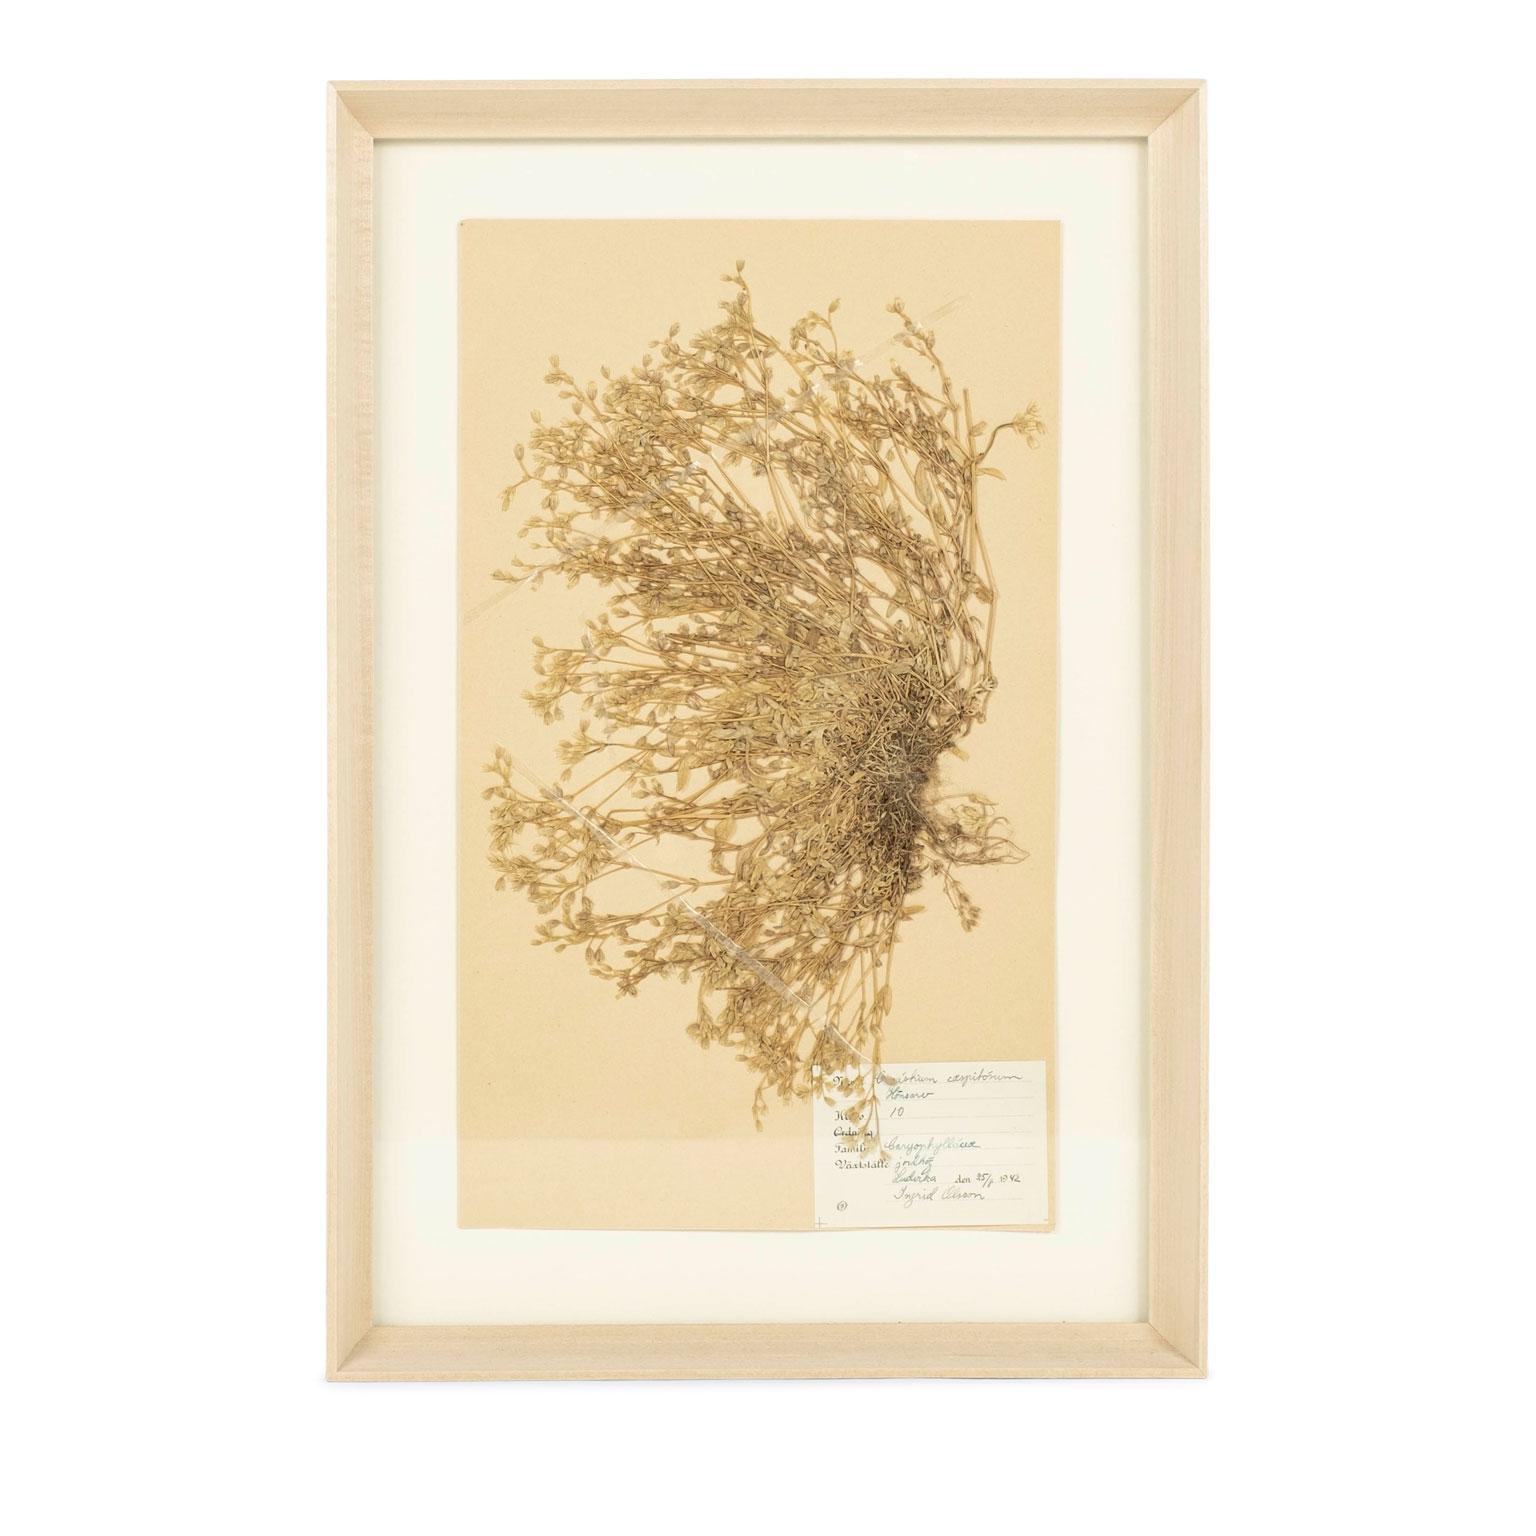 Set of six vintage Swedish herbaria, newly framed in unfinished maple (circa 1930-1950). Each float-mounted herbarium (botanical) measures unframed: 15.75 inches high x 9.5 inches wide. Each measures (framed) H 20.19 in x W 14 in x D 1 in. Sold